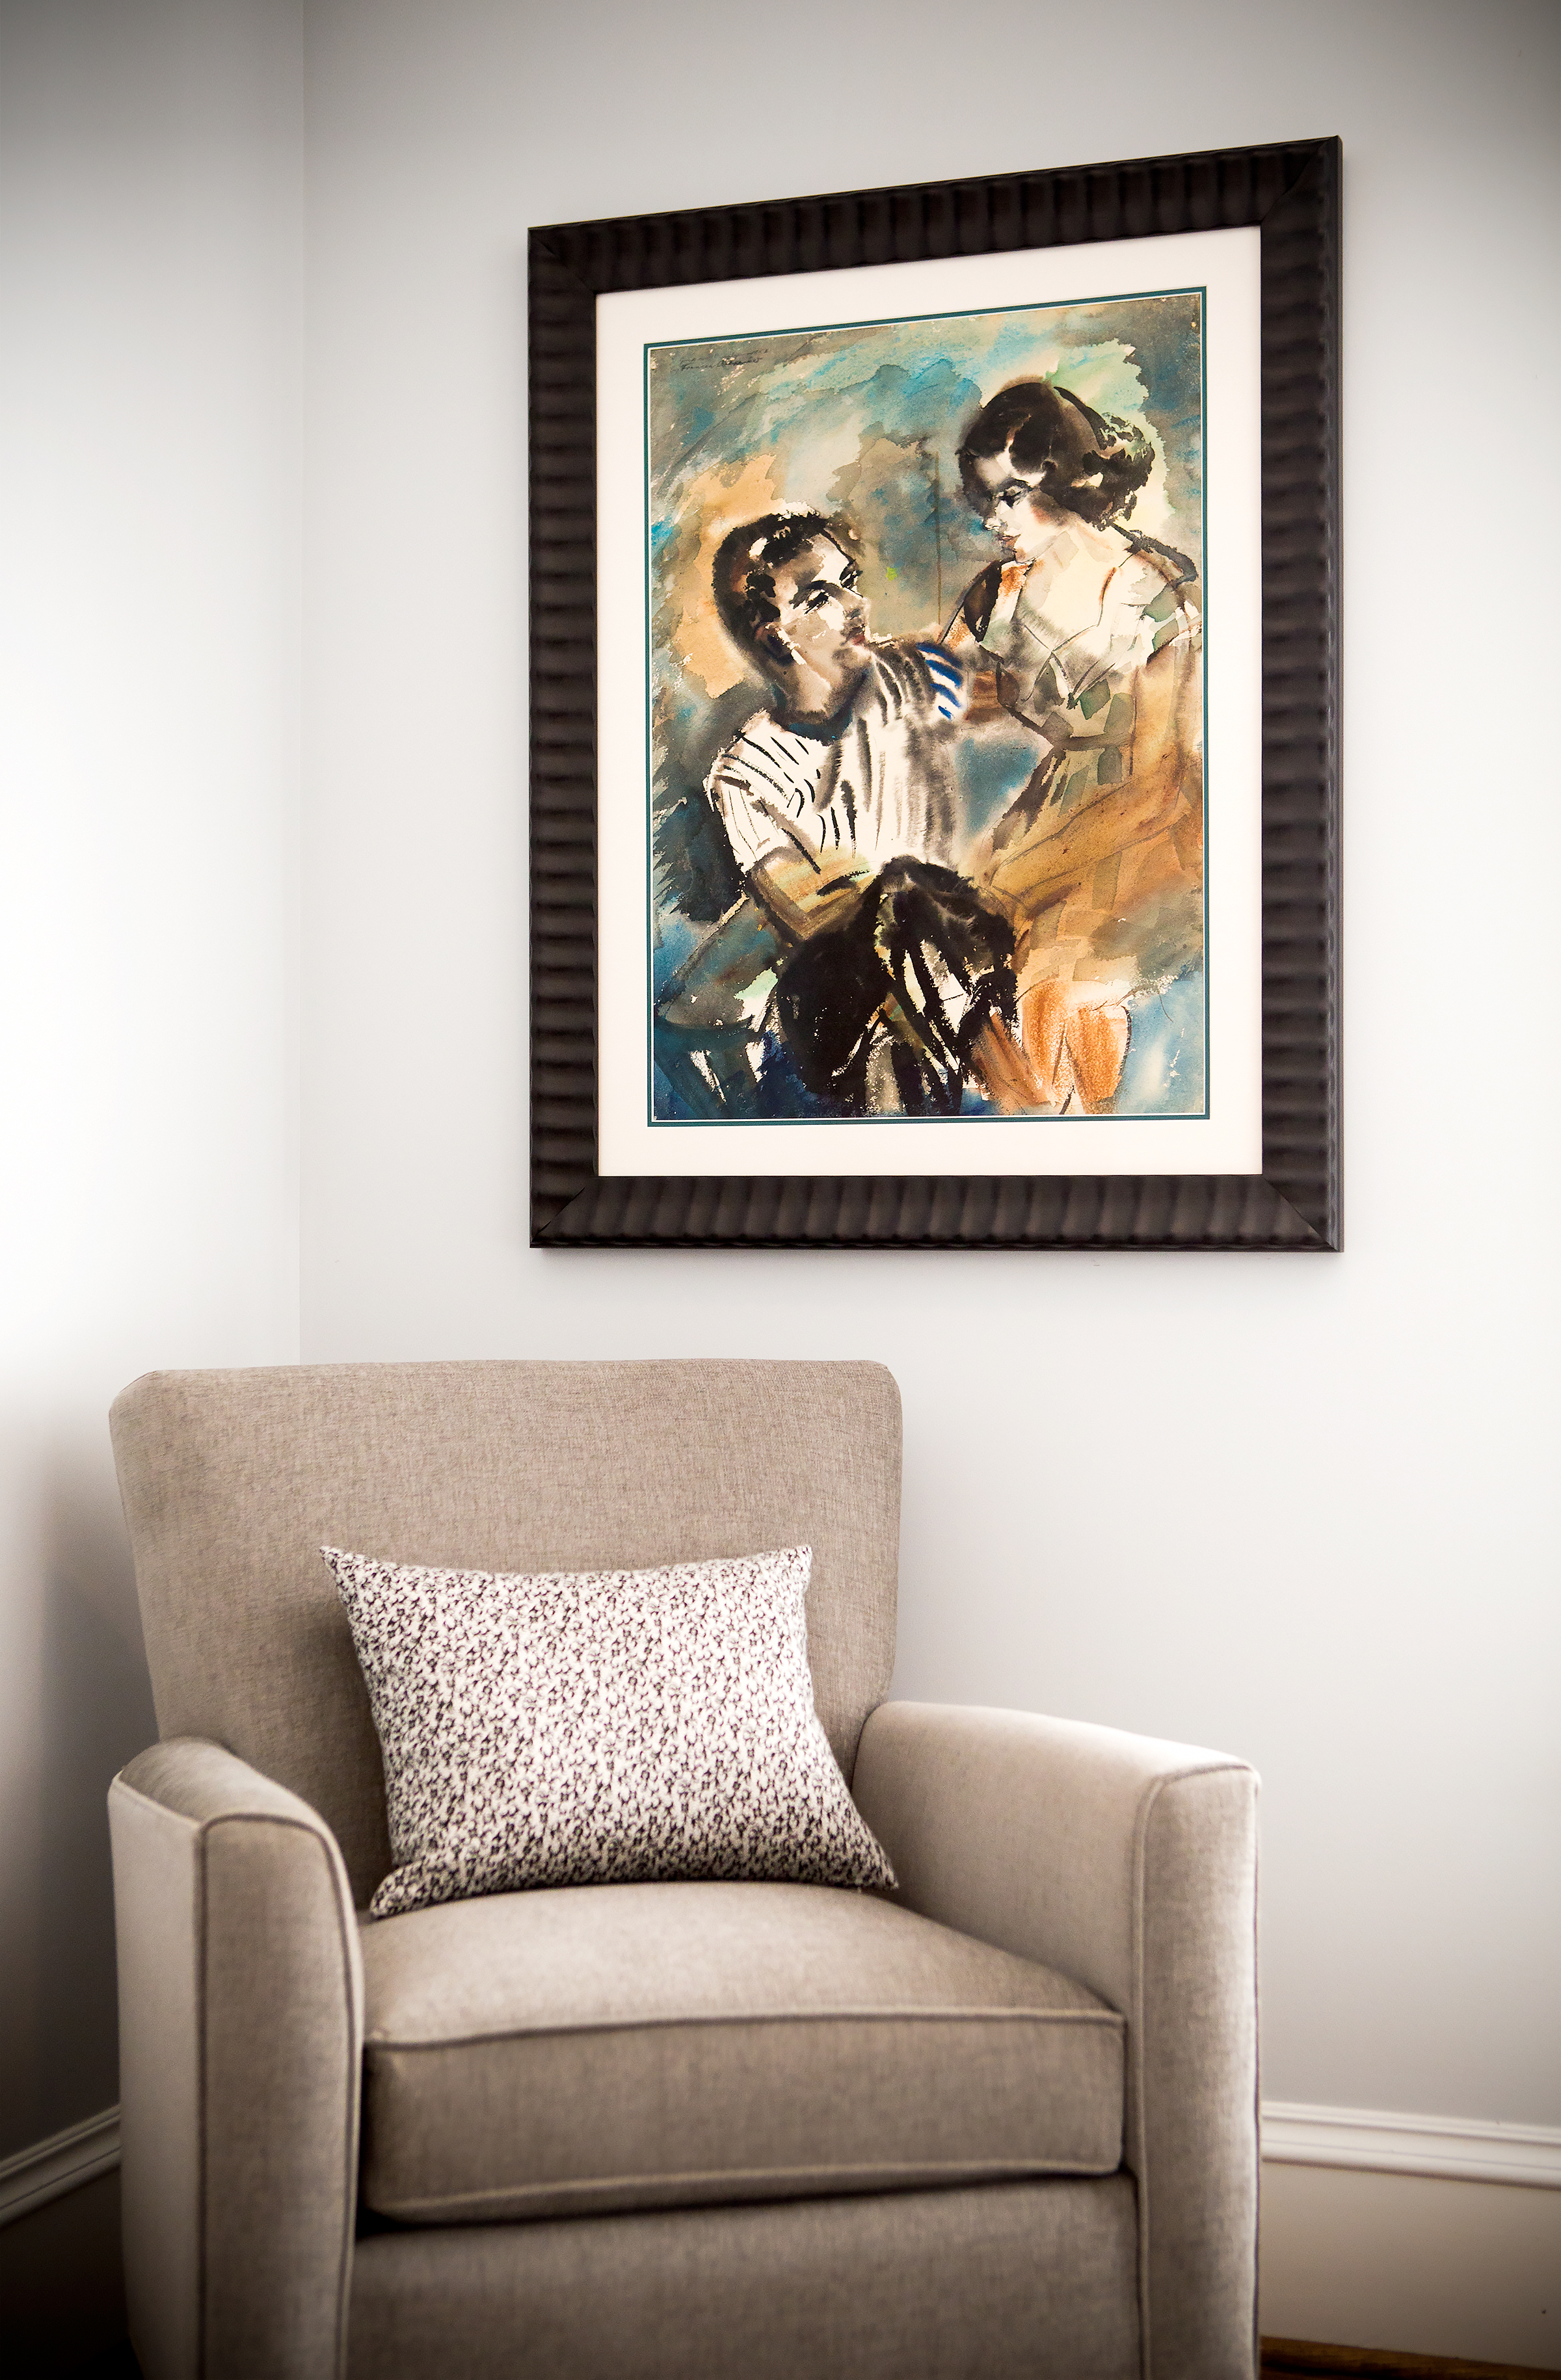 Brenda Bowen’s father, Jack Bowen, has a bedroom on the ground floor for those spontaneous overnights. Hanging above his personal chair is a very special pastel painting of Brenda’s parents when they were dating — Carolyn, age 22, and Jack, age 27. The portrait was done by her great-aunt Frances Alexander. 